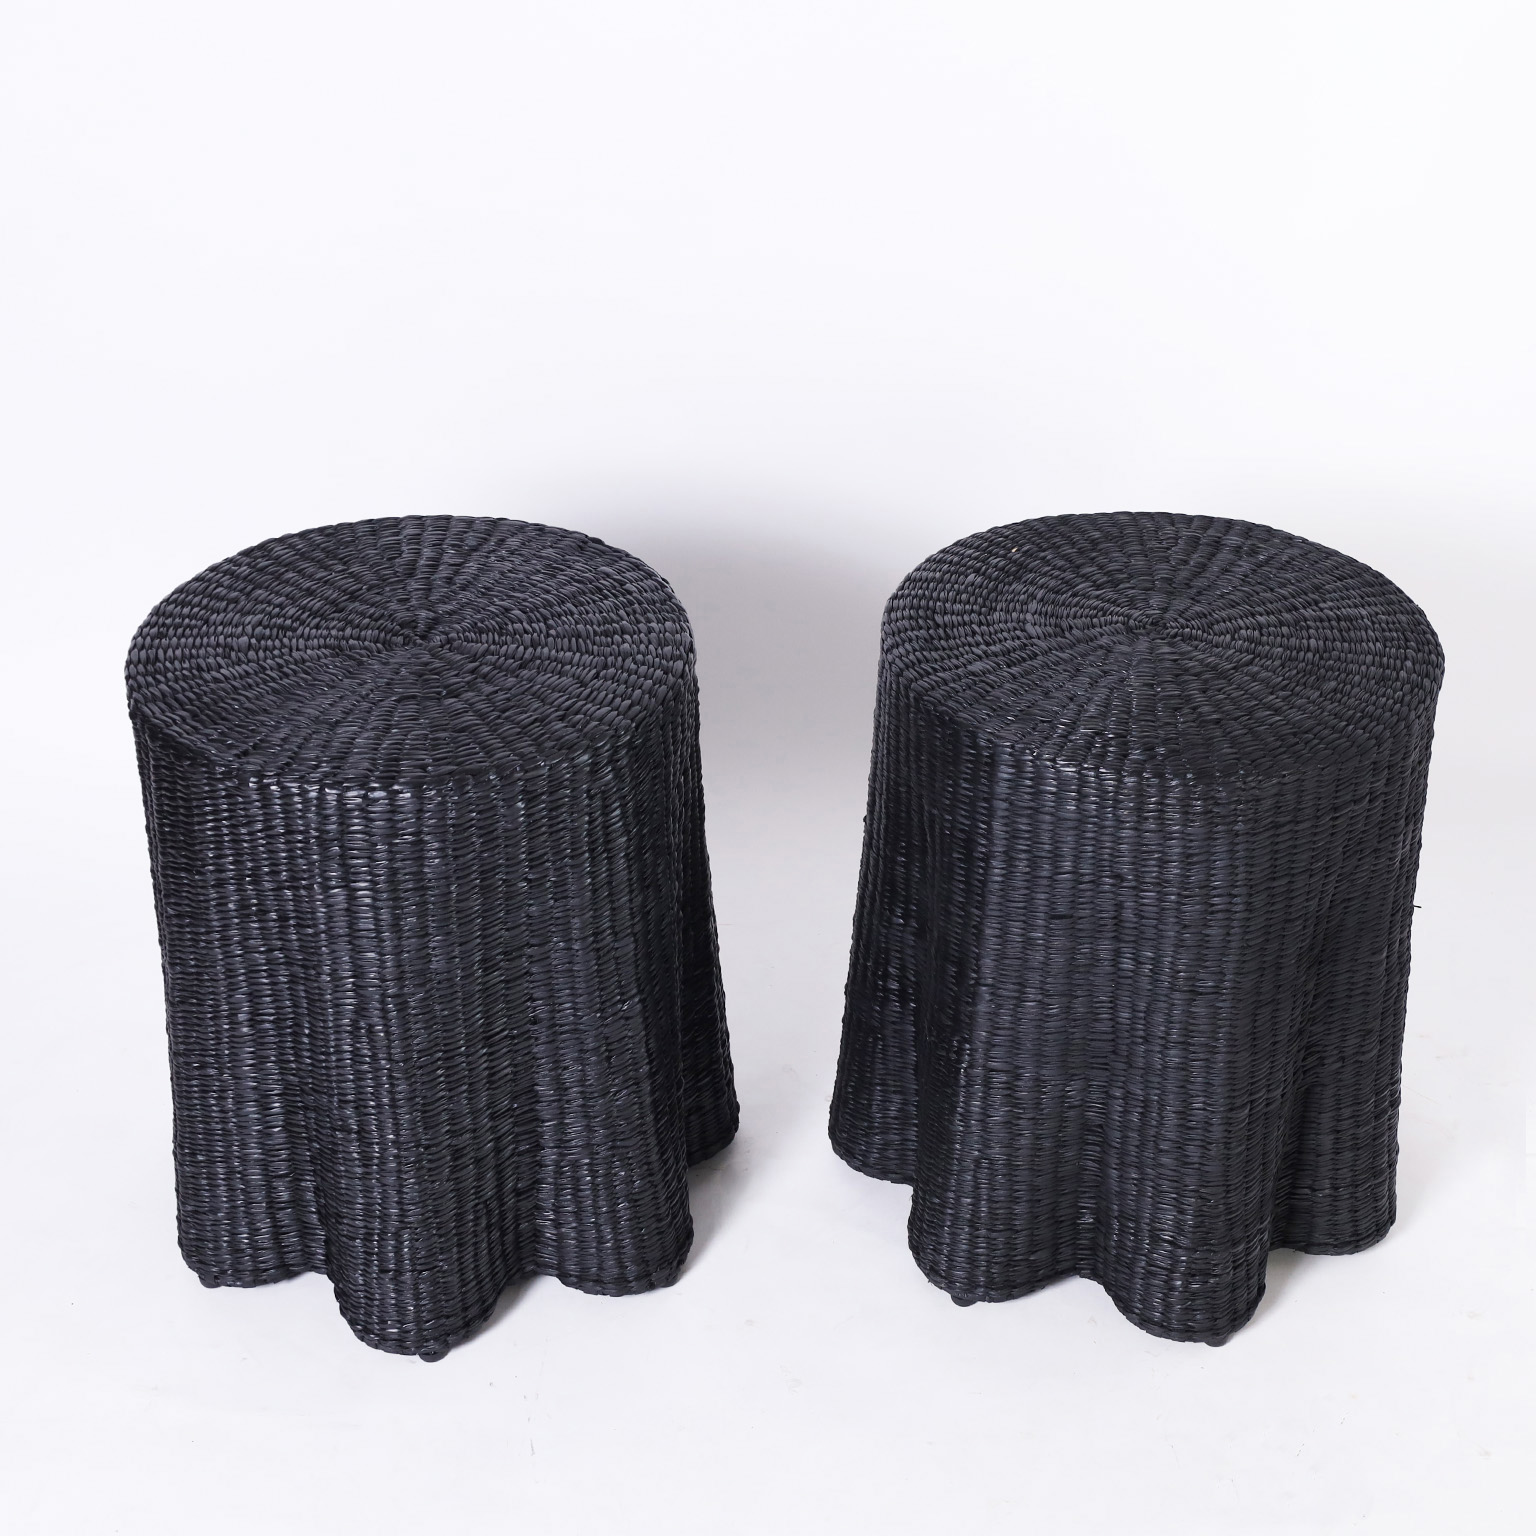 Pair of Black Woven Reed Ghost Drapery Stands from the FS Flores Collection